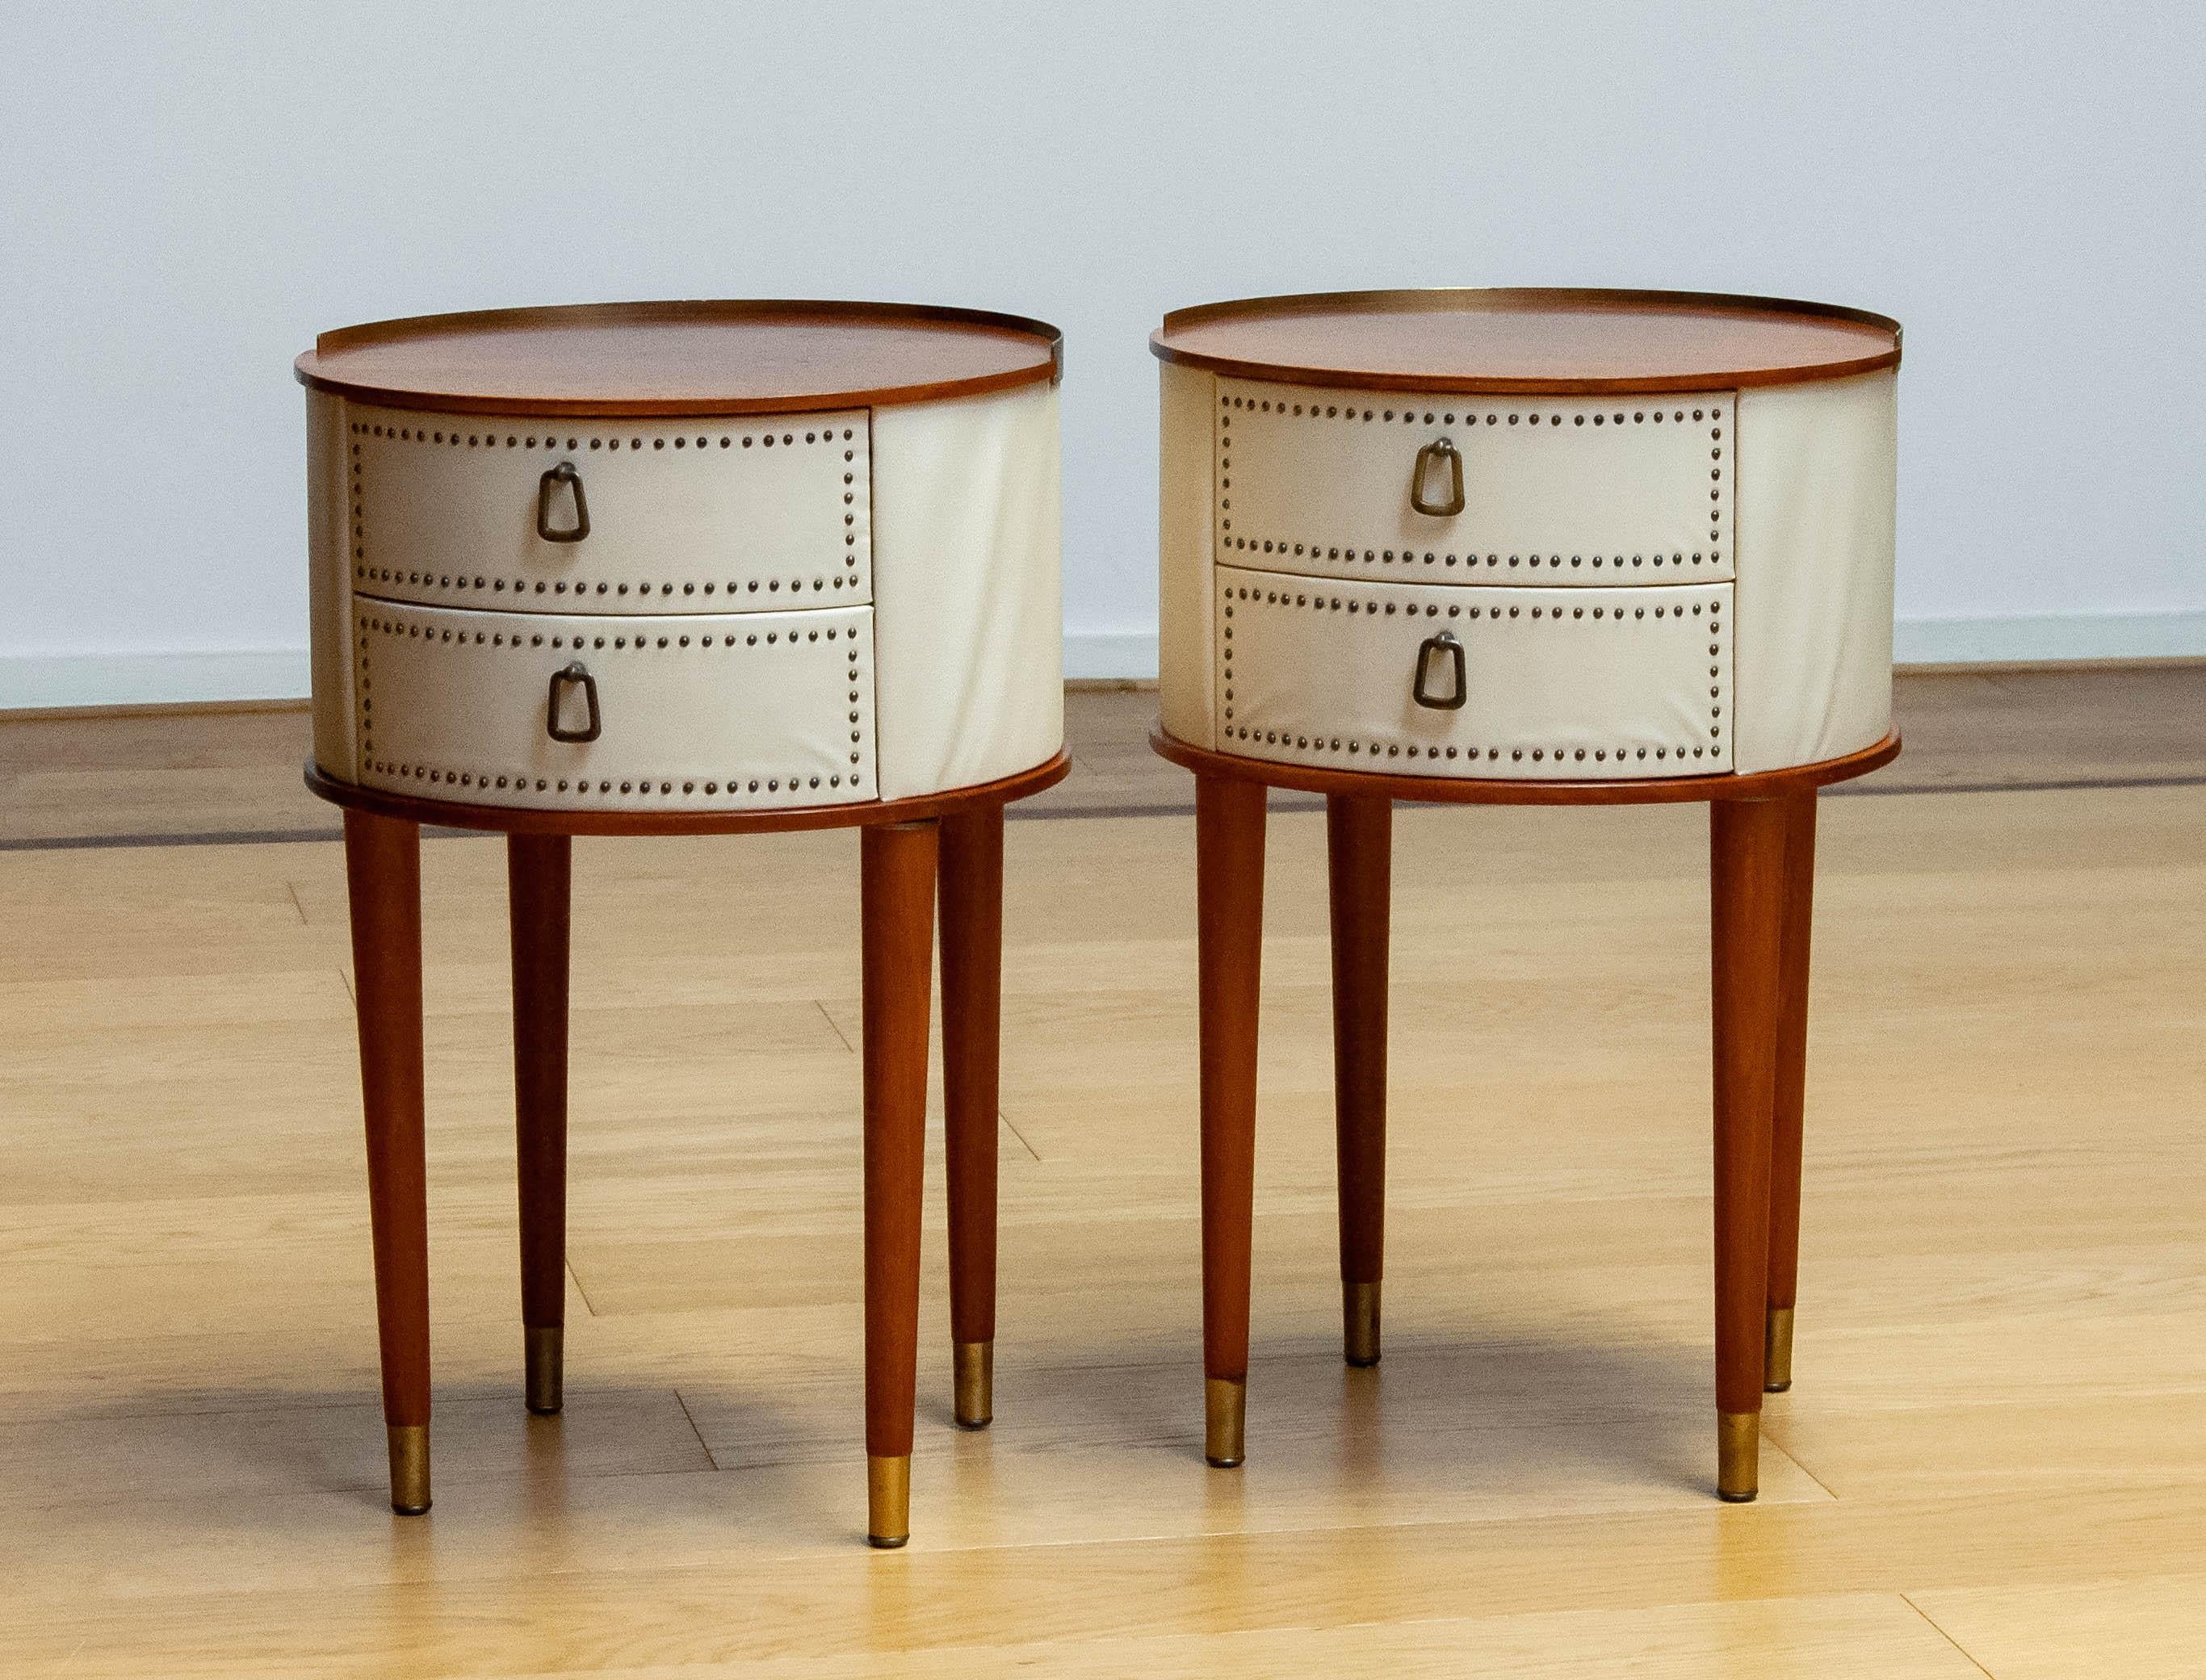 Faux Leather 1950 Pair Nailed Night Stands With Matching Vanity By Halvdan Pettersson. Sweden